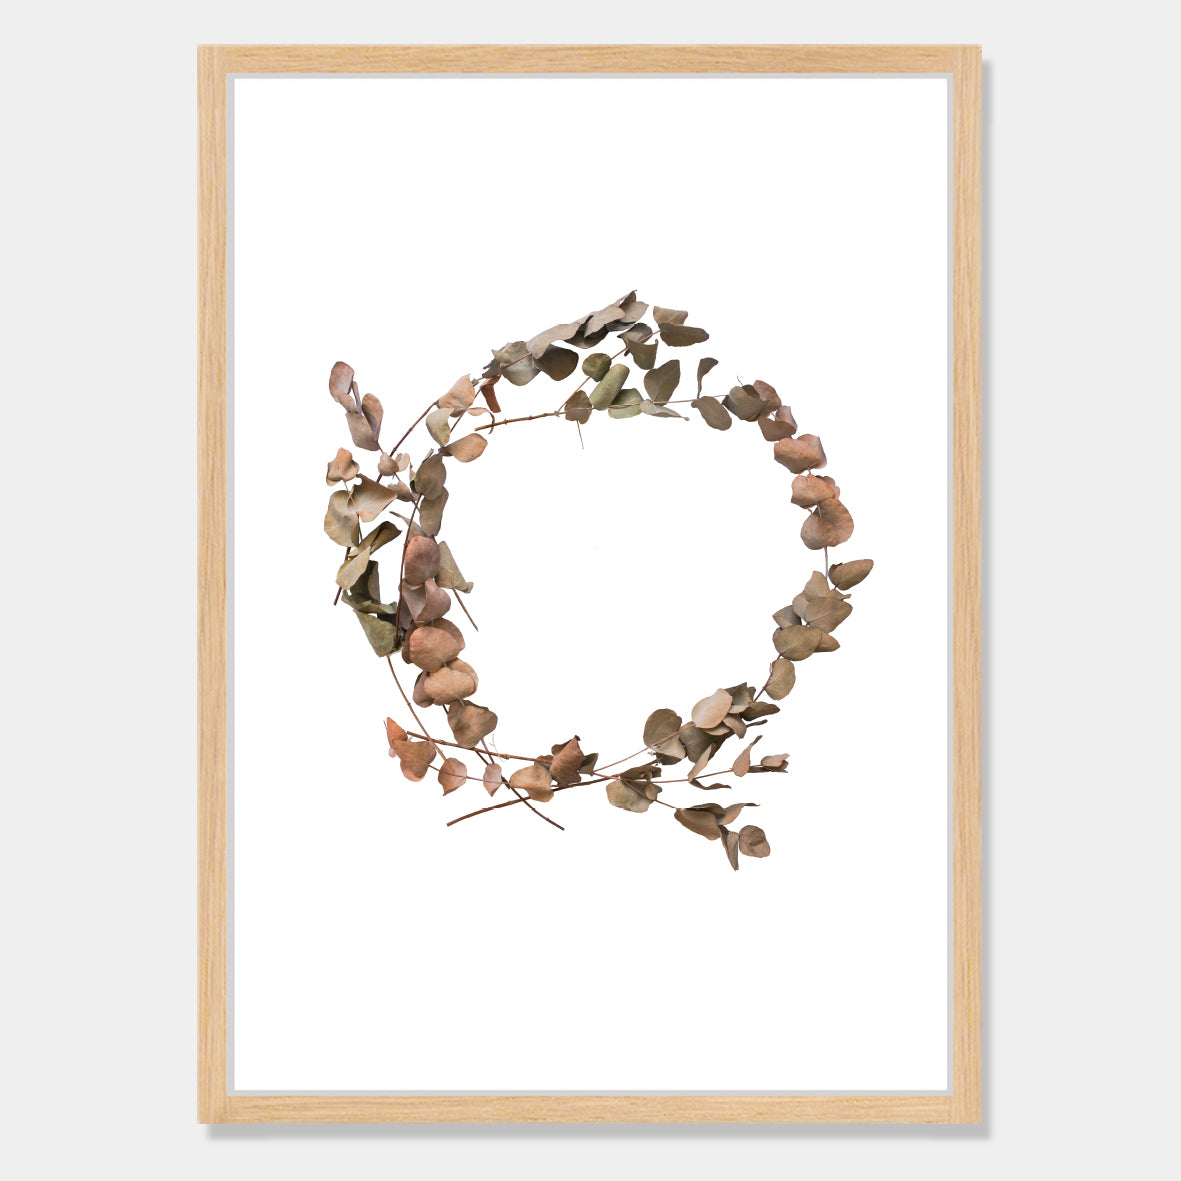 Photographic art print of dried leaves in a o shape by Bon Jung. Printed in New Zealand by endemicworld and framed in raw oak.